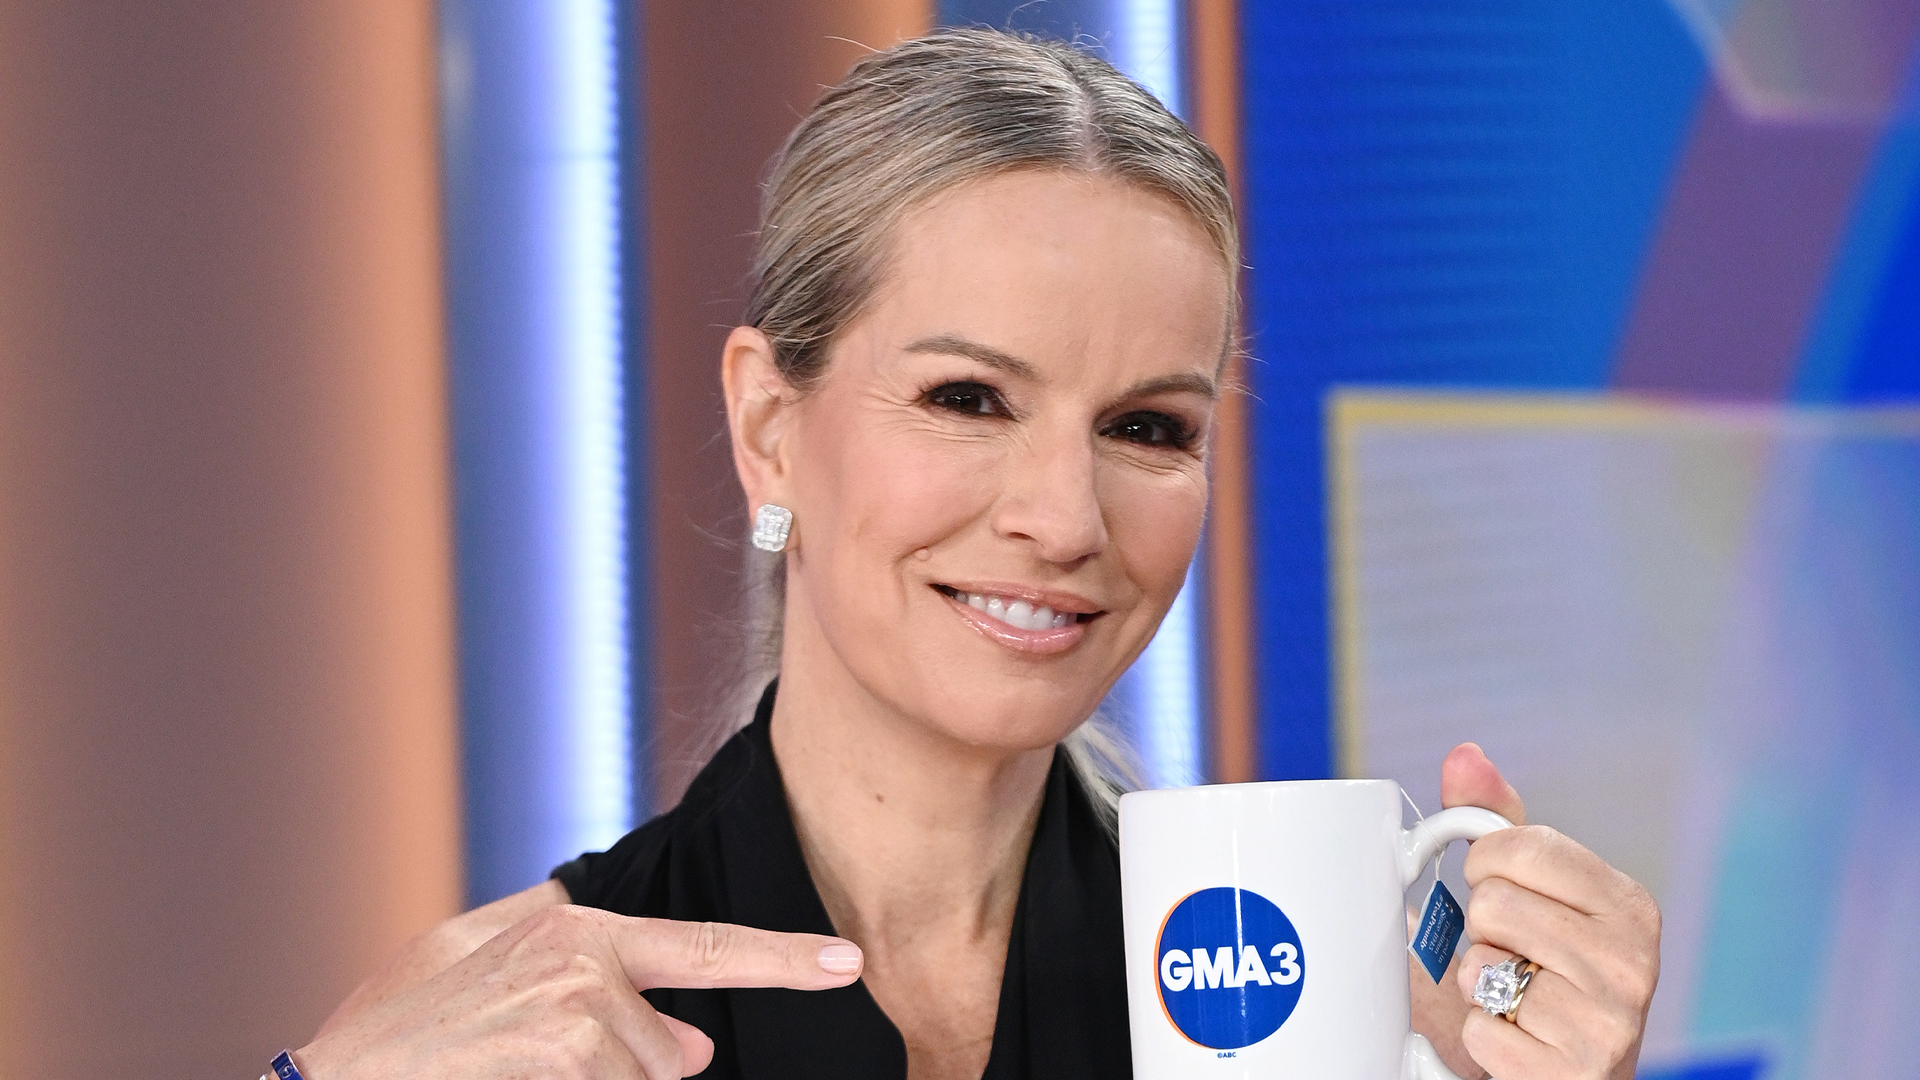 GMA3 co-host Dr. Jennifer Ashton leaving ABC network after 13 years to launch new wellness company [Video]